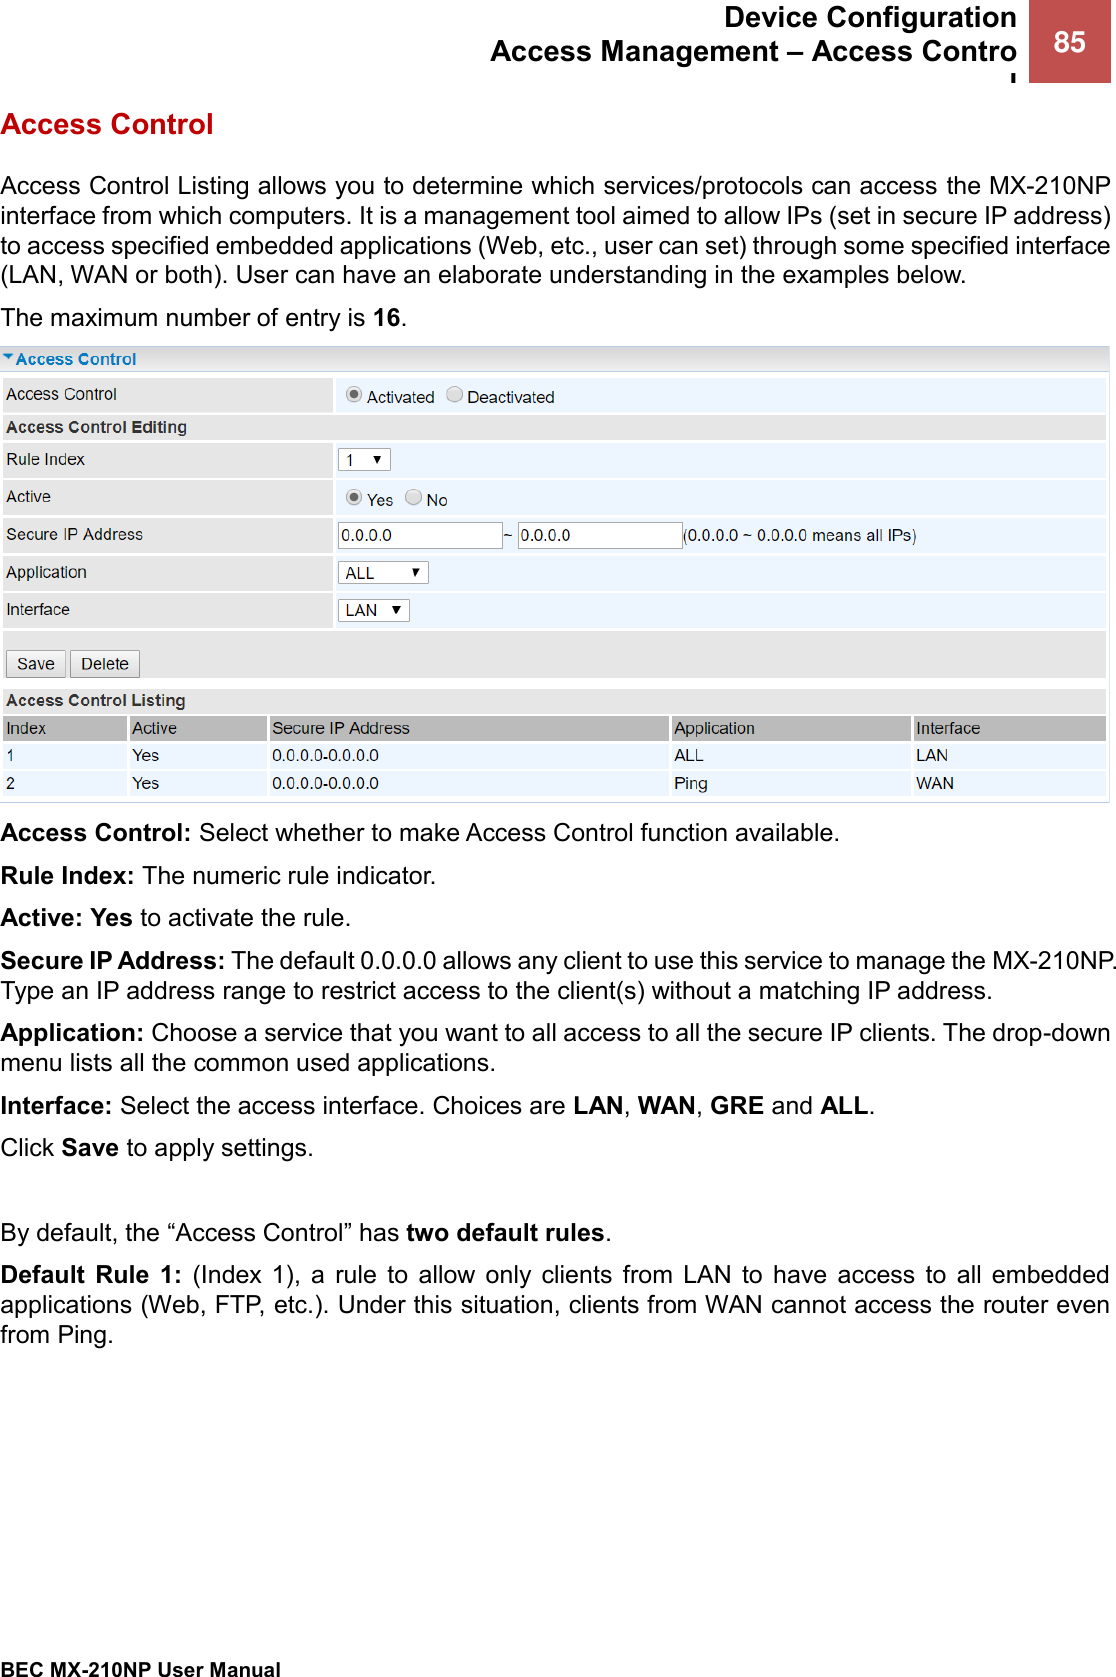  Device Configuration Access Management – Access Control 85   BEC MX-210NP User Manual  Access Control Access Control Listing allows you to determine which services/protocols can access the MX-210NP interface from which computers. It is a management tool aimed to allow IPs (set in secure IP address) to access specified embedded applications (Web, etc., user can set) through some specified interface (LAN, WAN or both). User can have an elaborate understanding in the examples below. The maximum number of entry is 16.  Access Control: Select whether to make Access Control function available. Rule Index: The numeric rule indicator. Active: Yes to activate the rule. Secure IP Address: The default 0.0.0.0 allows any client to use this service to manage the MX-210NP. Type an IP address range to restrict access to the client(s) without a matching IP address. Application: Choose a service that you want to all access to all the secure IP clients. The drop-down menu lists all the common used applications. Interface: Select the access interface. Choices are LAN, WAN, GRE and ALL. Click Save to apply settings.   By default, the “Access Control” has two default rules.  Default  Rule  1:  (Index  1),  a  rule  to  allow  only  clients  from  LAN  to  have  access  to  all  embedded applications (Web, FTP, etc.). Under this situation, clients from WAN cannot access the router even from Ping. 